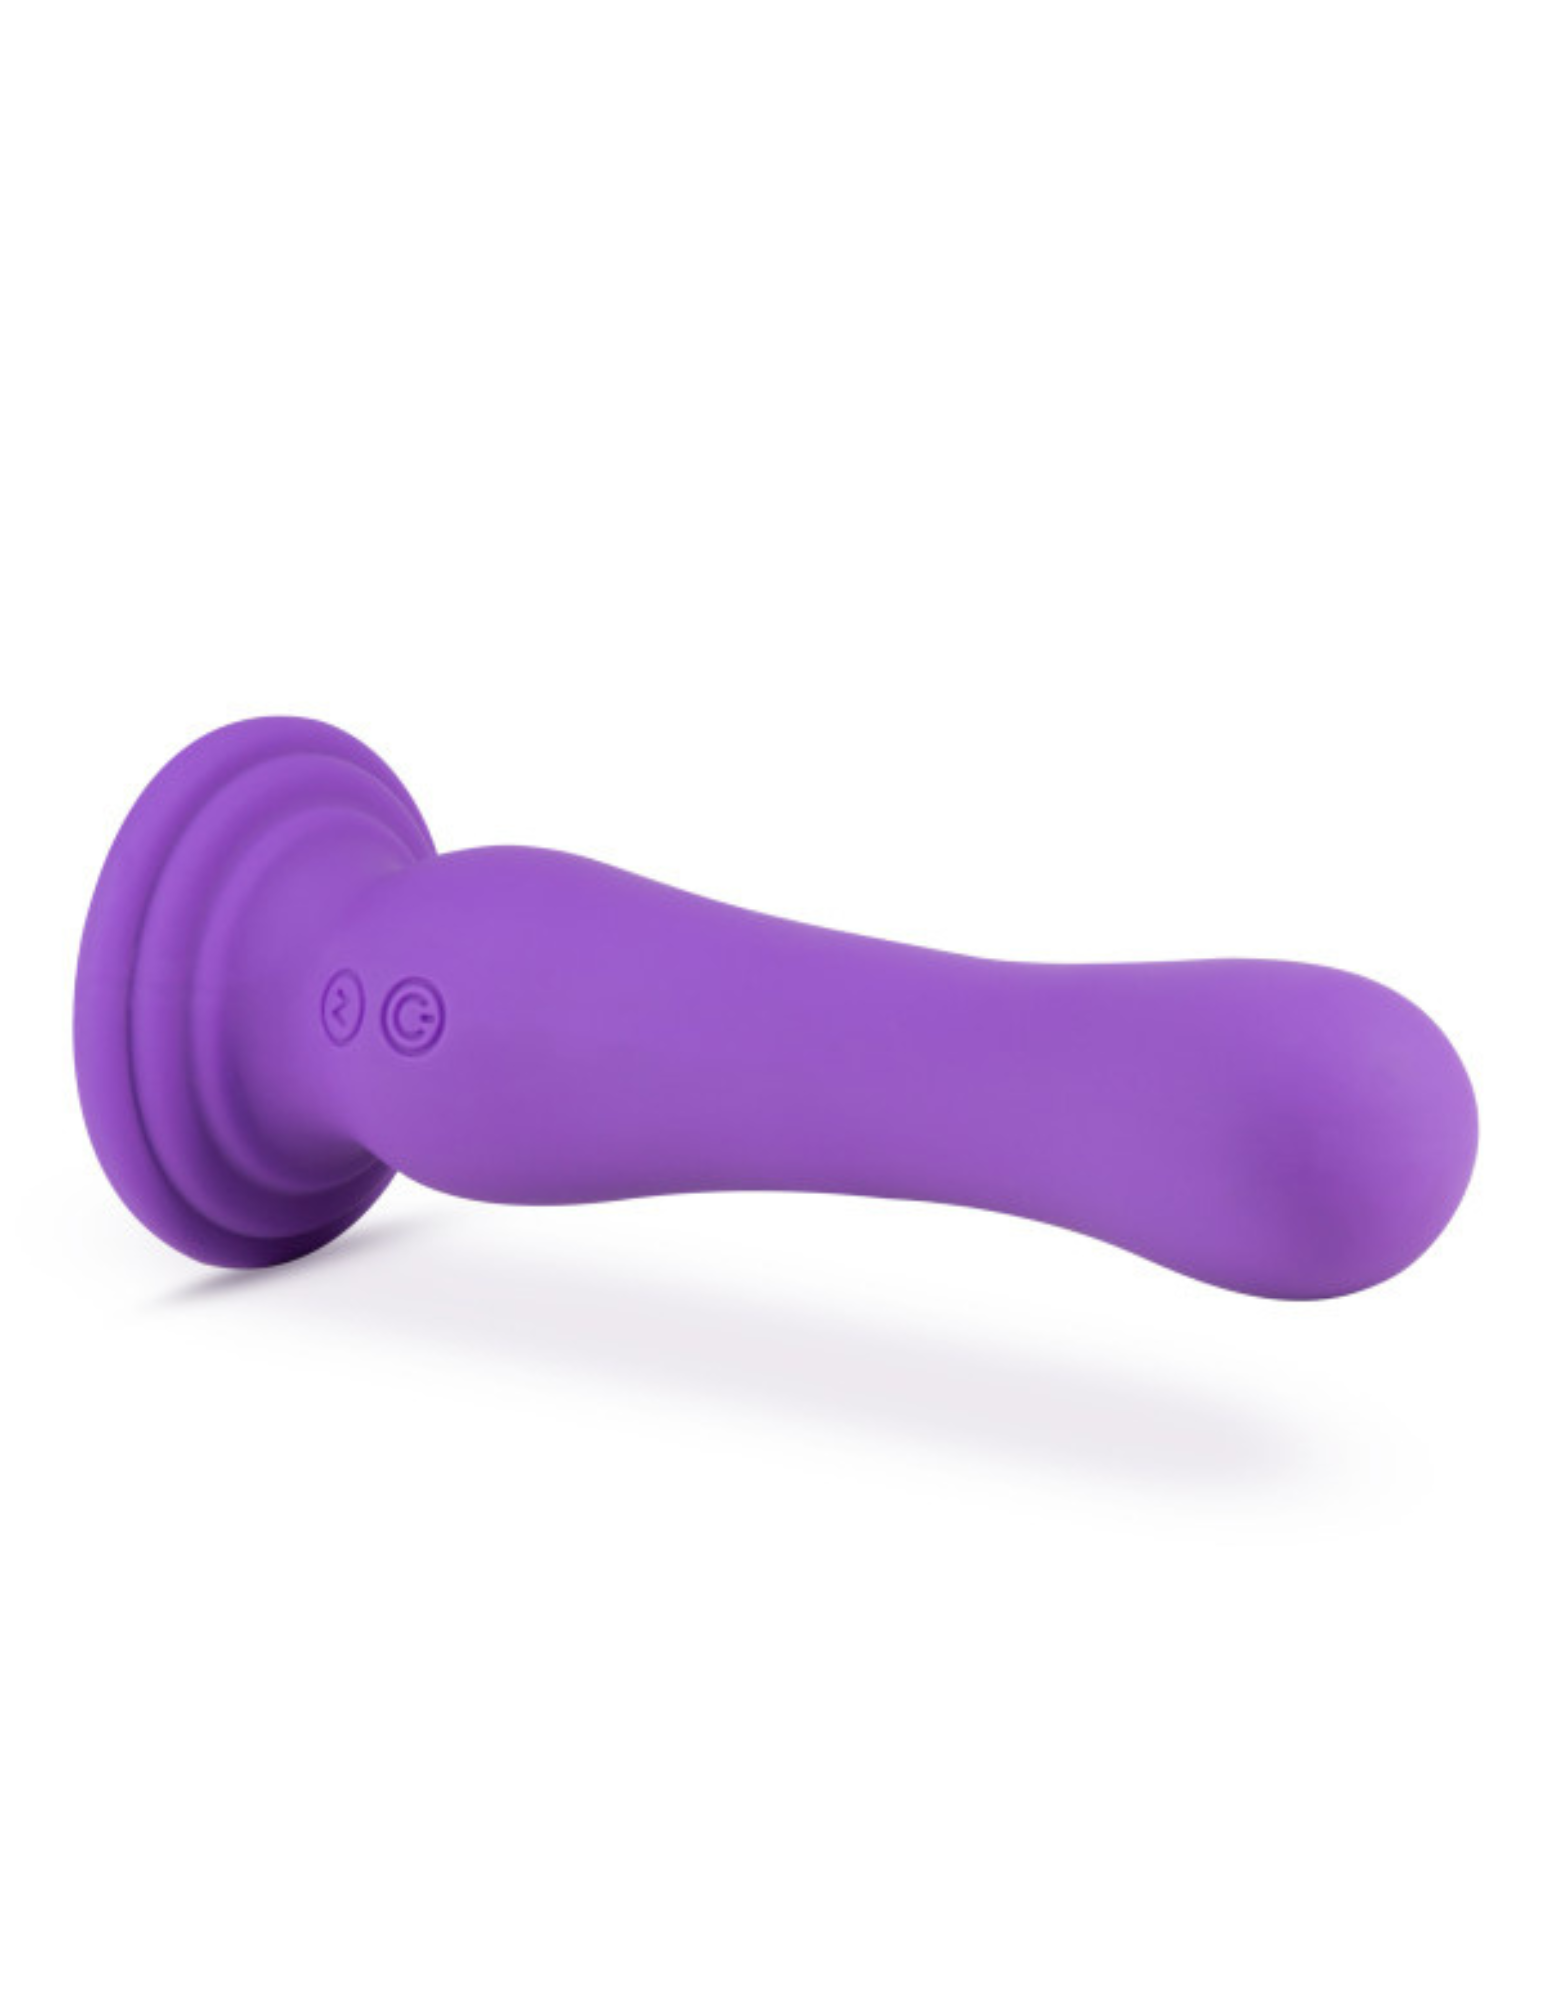 Side view of the Impressions Ibiza Vibrator from Blush (purple) shows its contoured shape and large suction cup base.